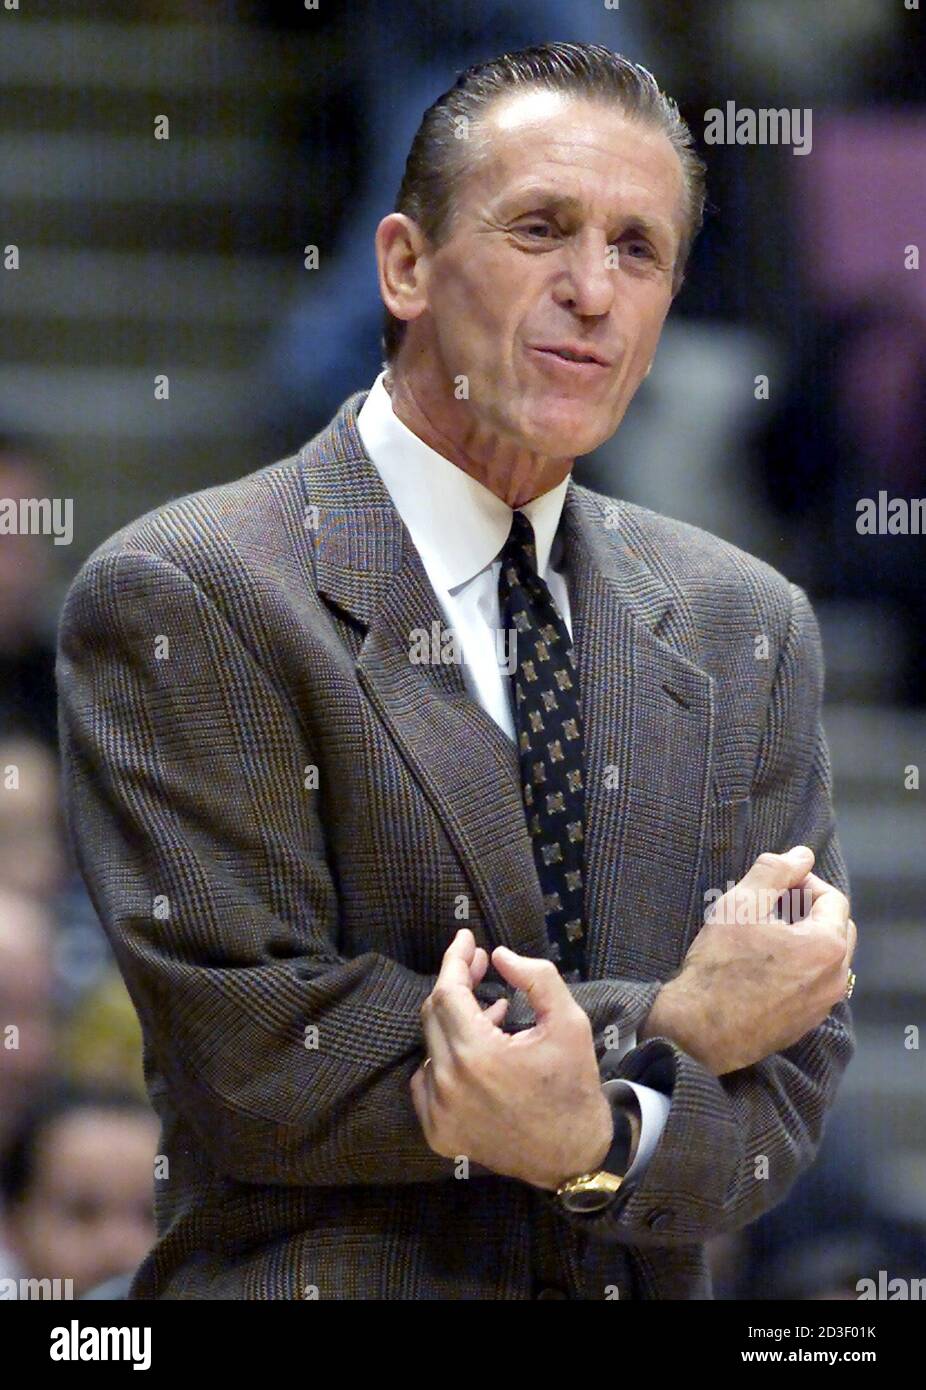 Miami Heat coach Pat Riley reacts to an official's call in the Heat game  with the New Jersey Nets in the second period of their NBA game November  15, 2000 in East